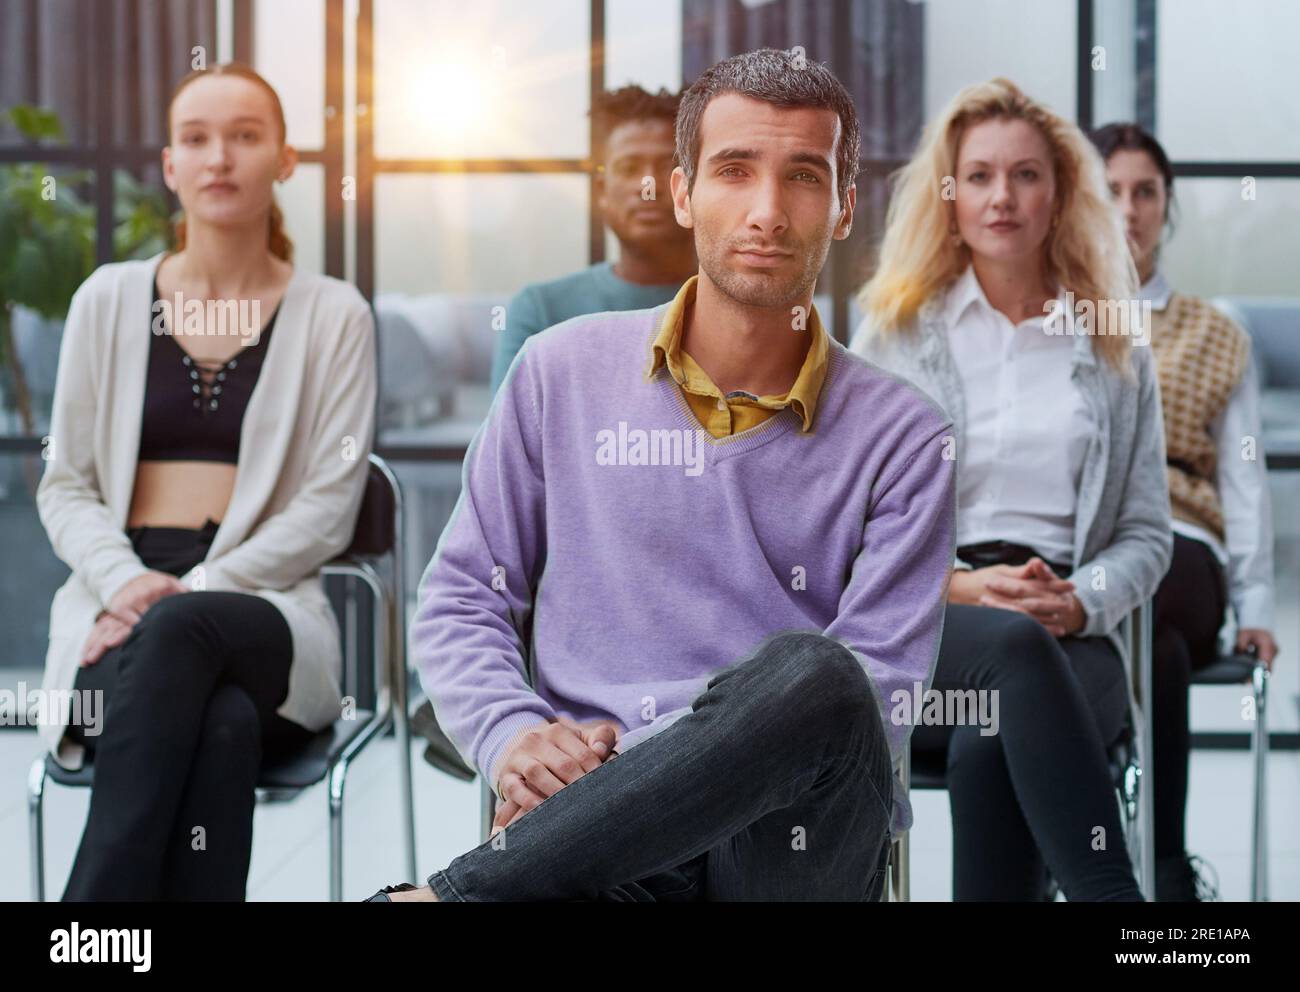 Businessman sitting in front of his colleagues looking at the camera Stock Photo